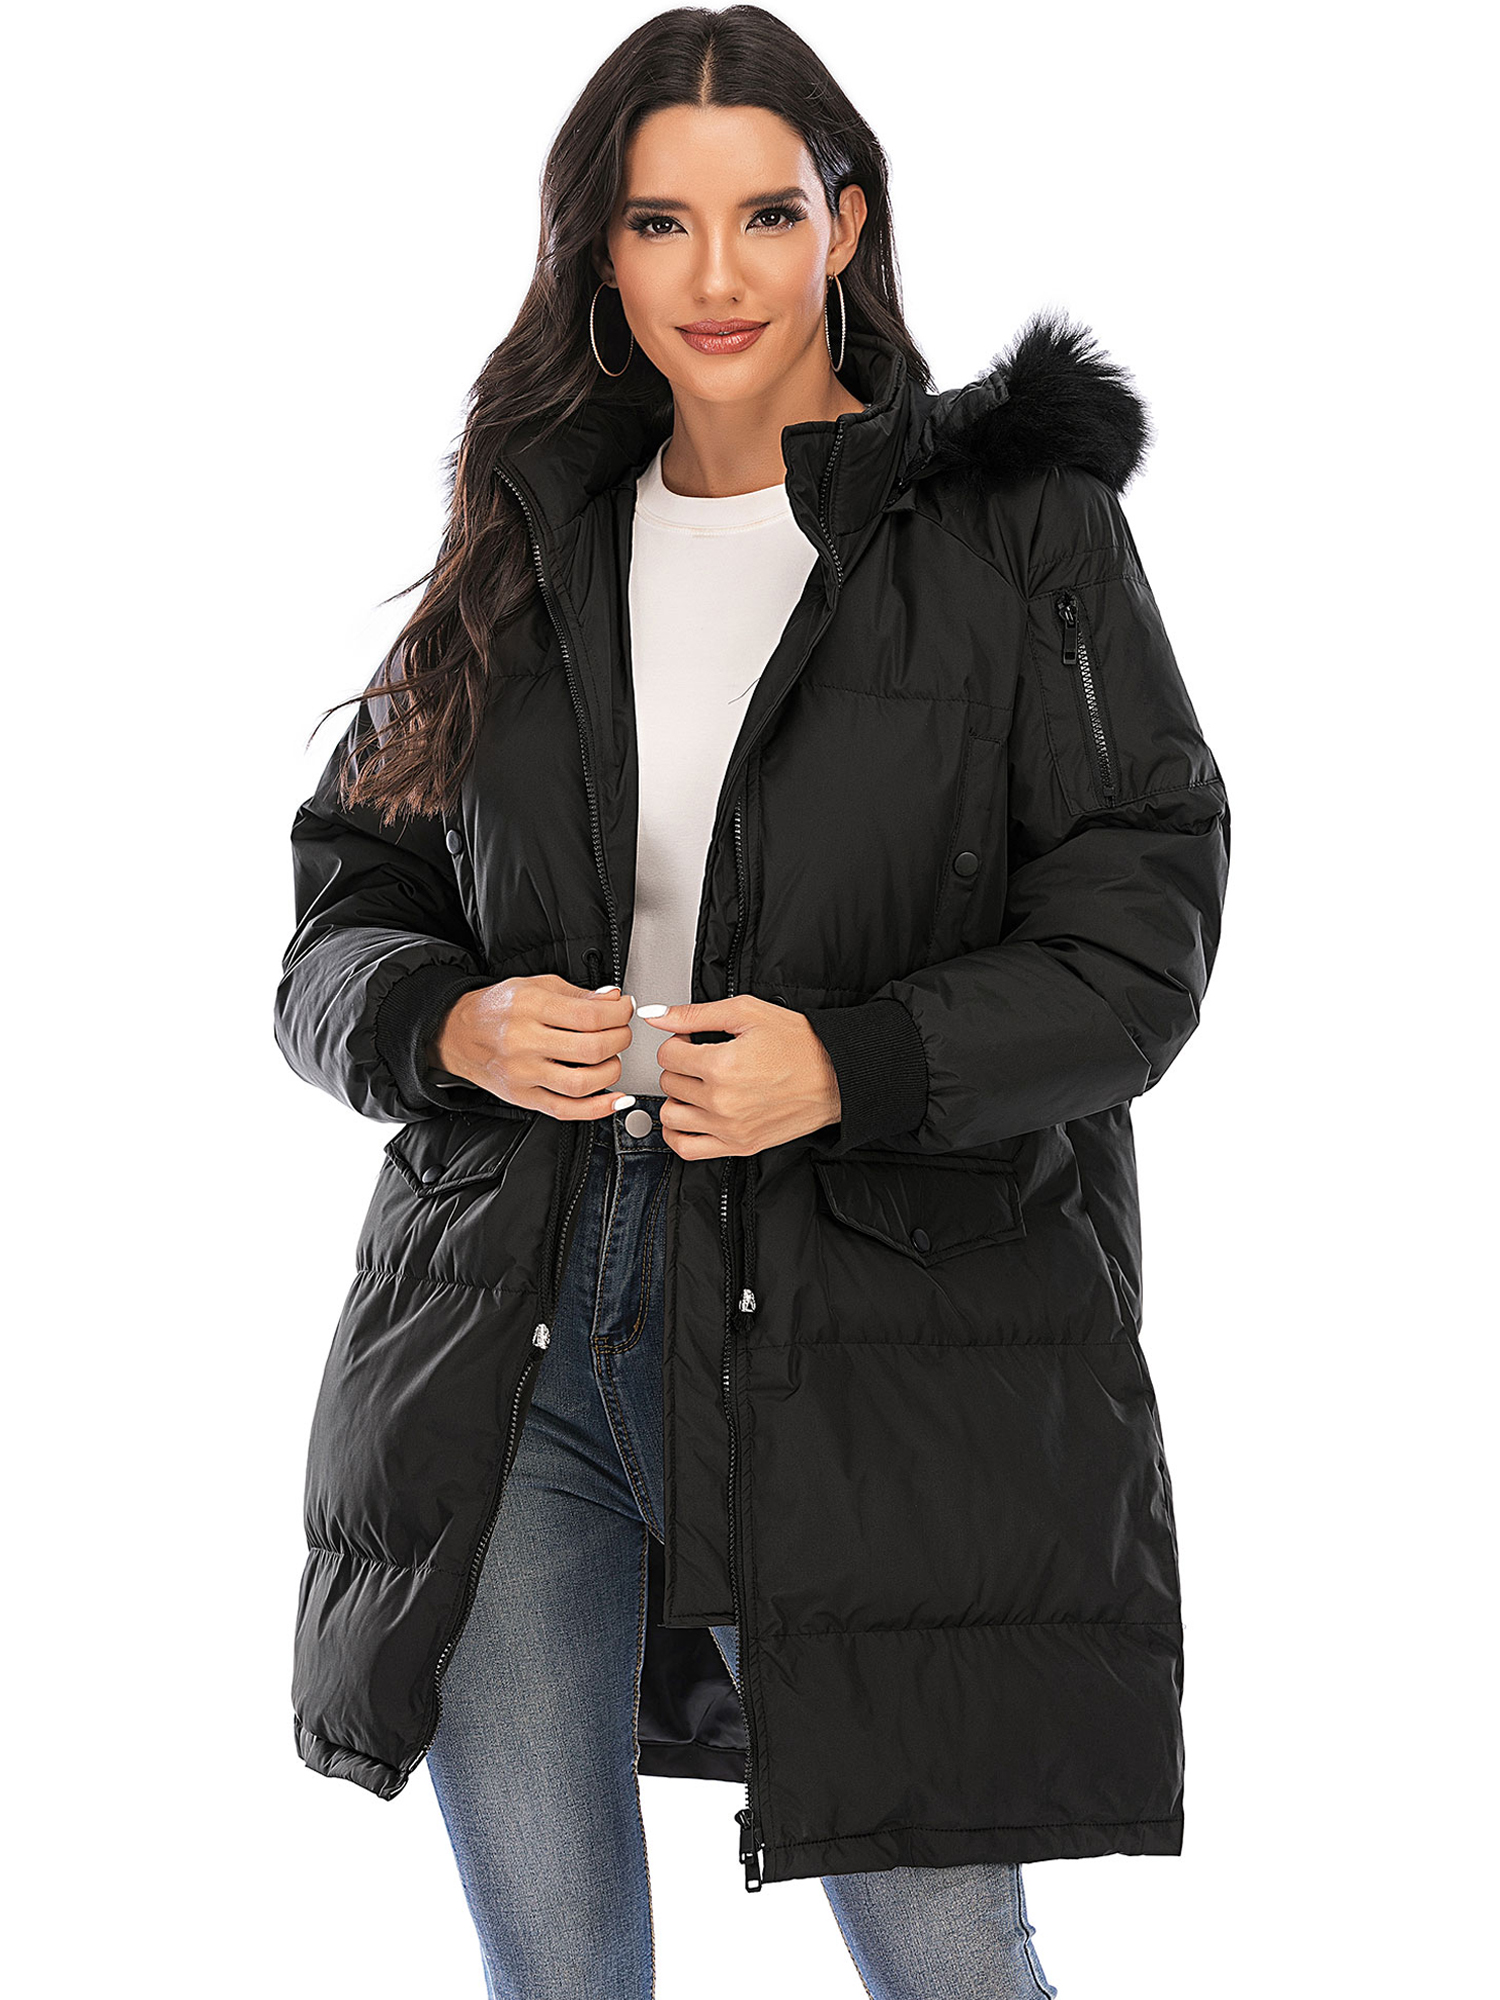 LELINTA Women's Down Blend Quilted Jacket Puffer Jacket Detachable Hood with Fur Collar, Camouflage - image 3 of 7